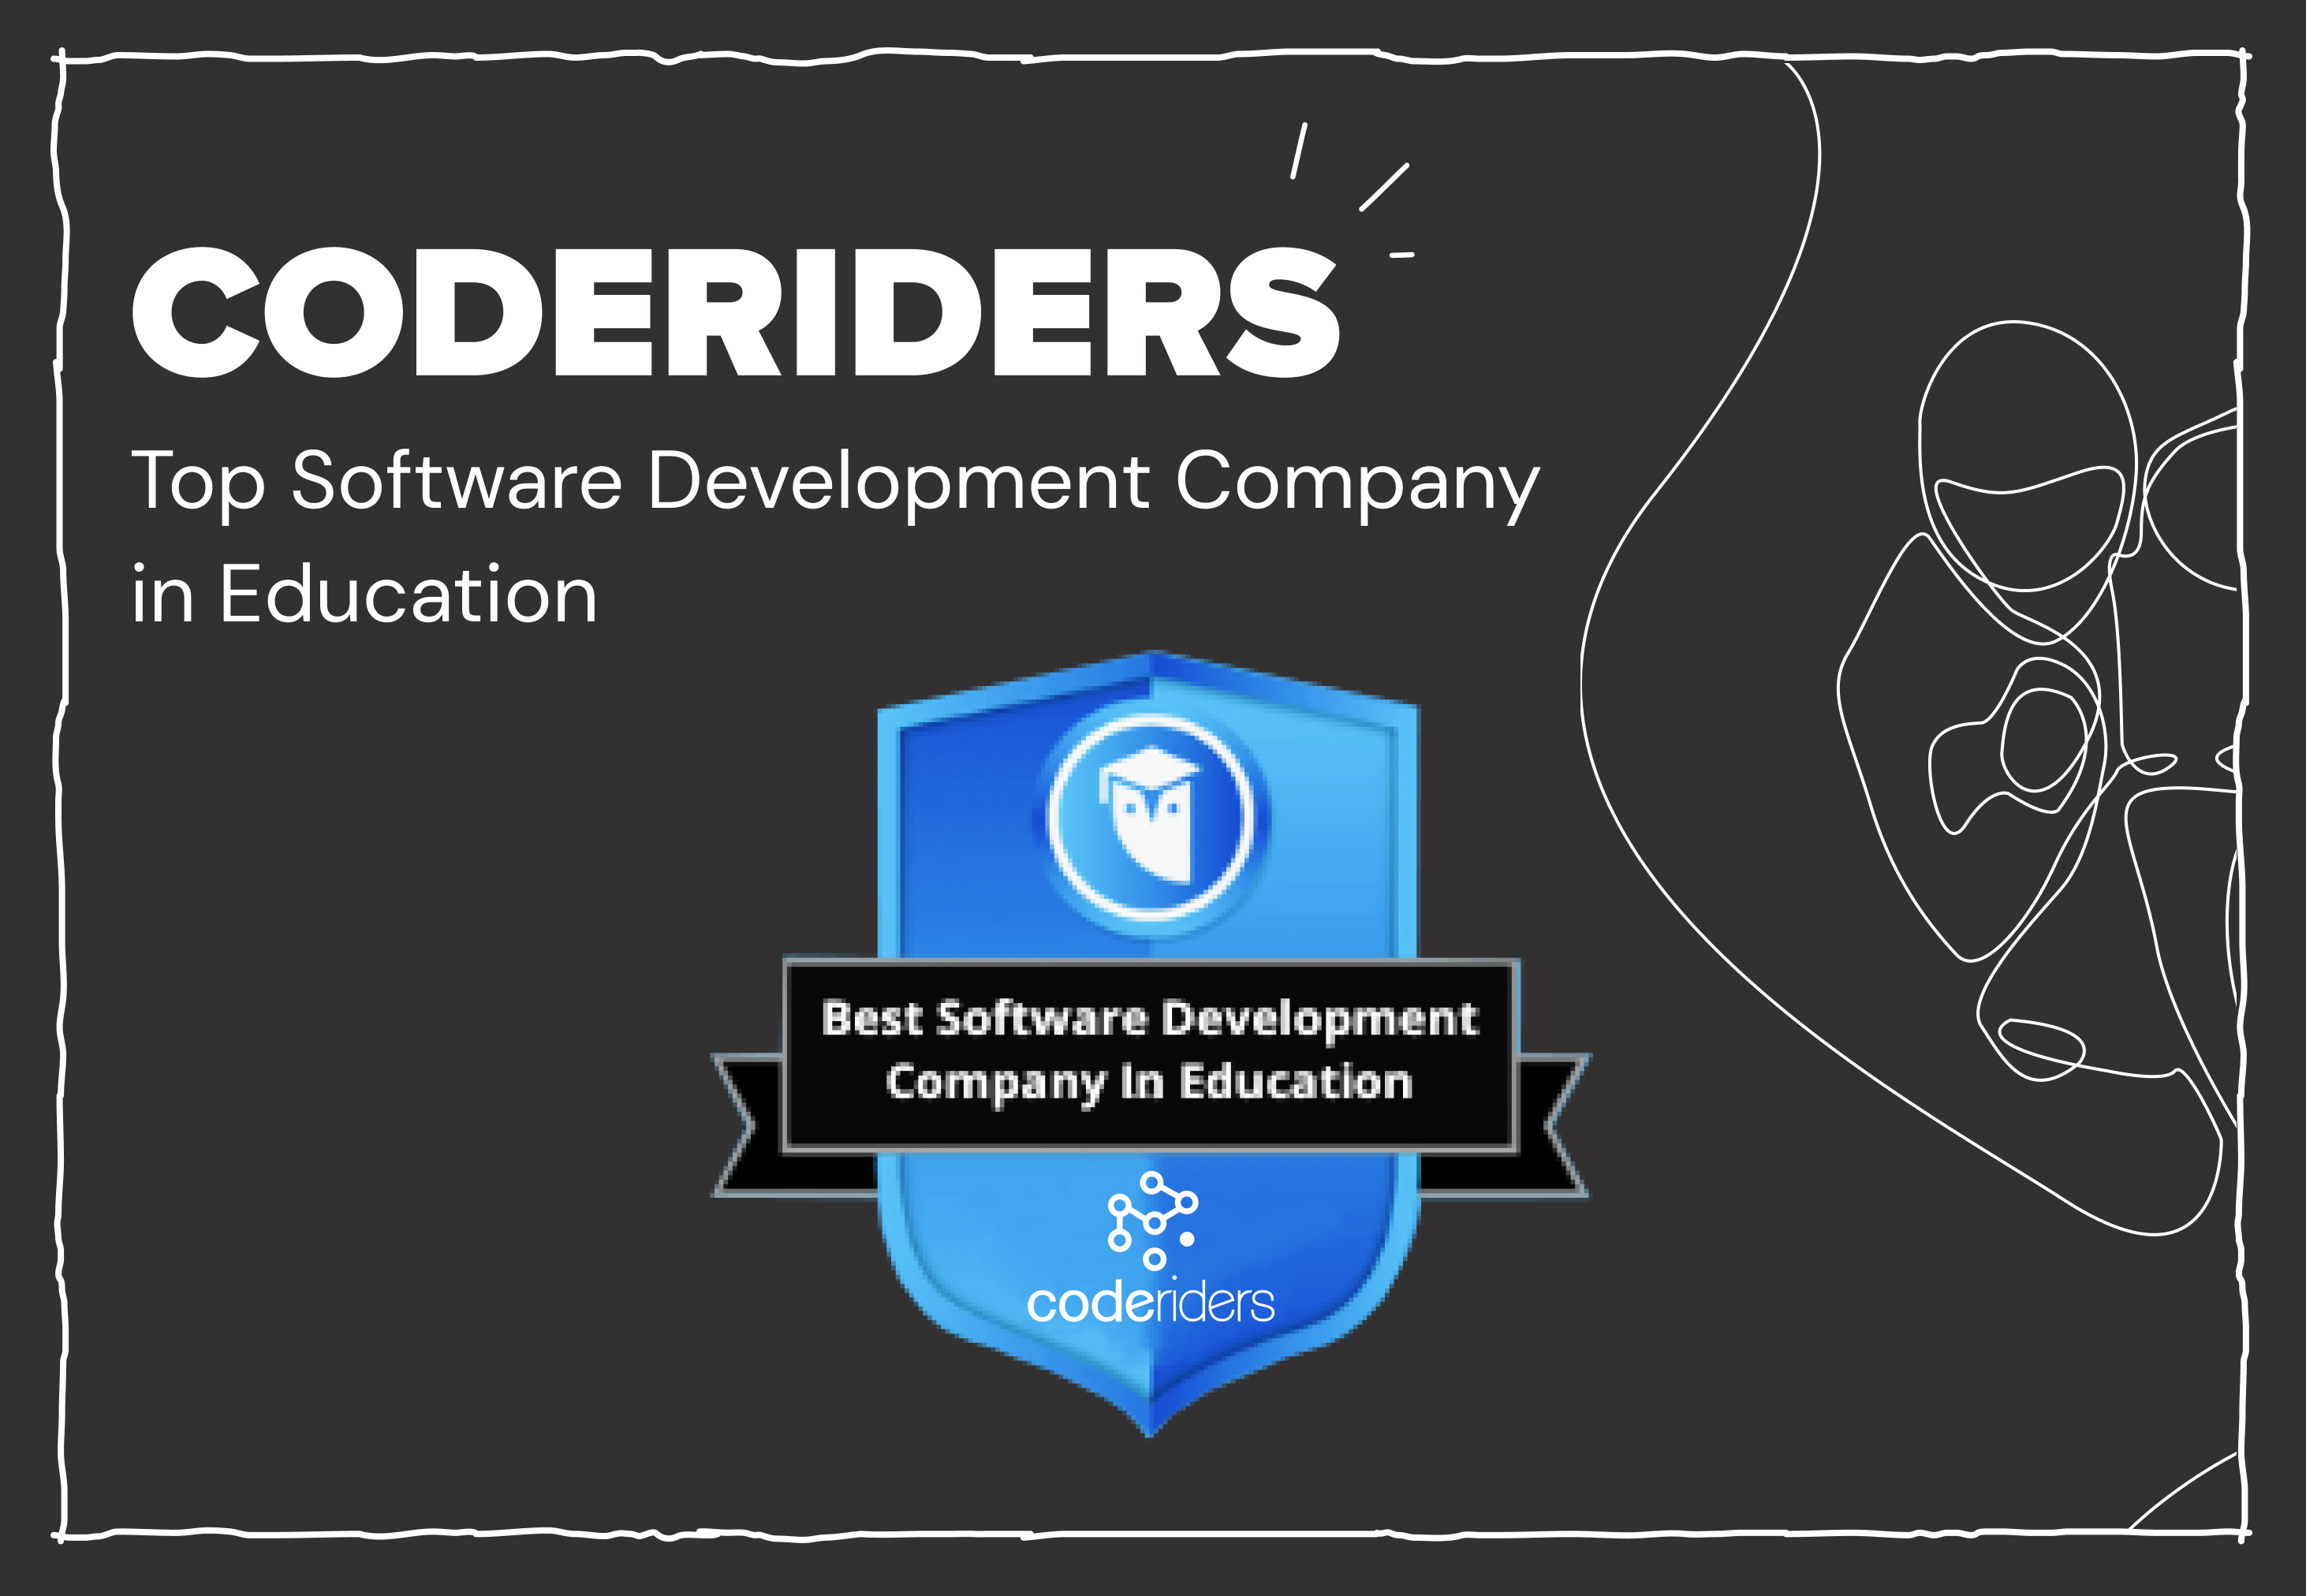 CodeRiders software outsourcing company is recognized in the international offshore software development industry as one of the best software vendors providing EdTech software solutions